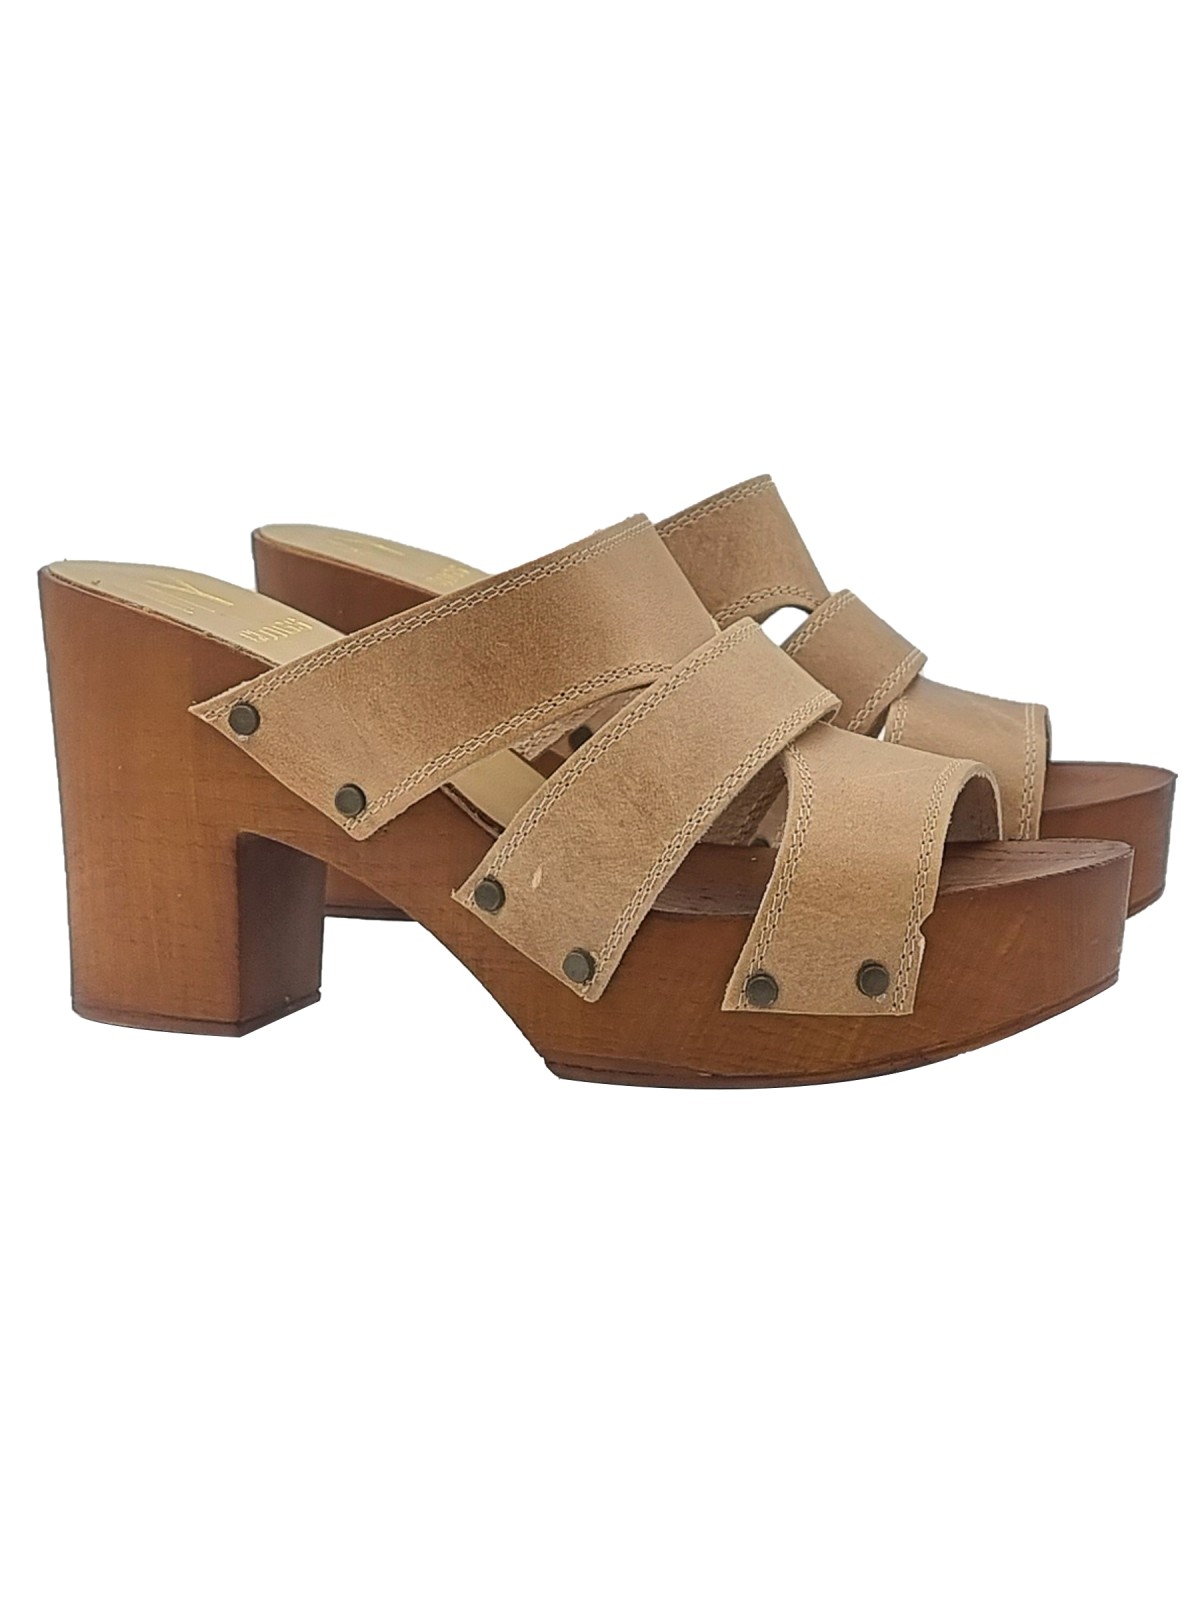 LEATHER CLOGS TAUPE COLORED WITH 9,5 CM HEEL